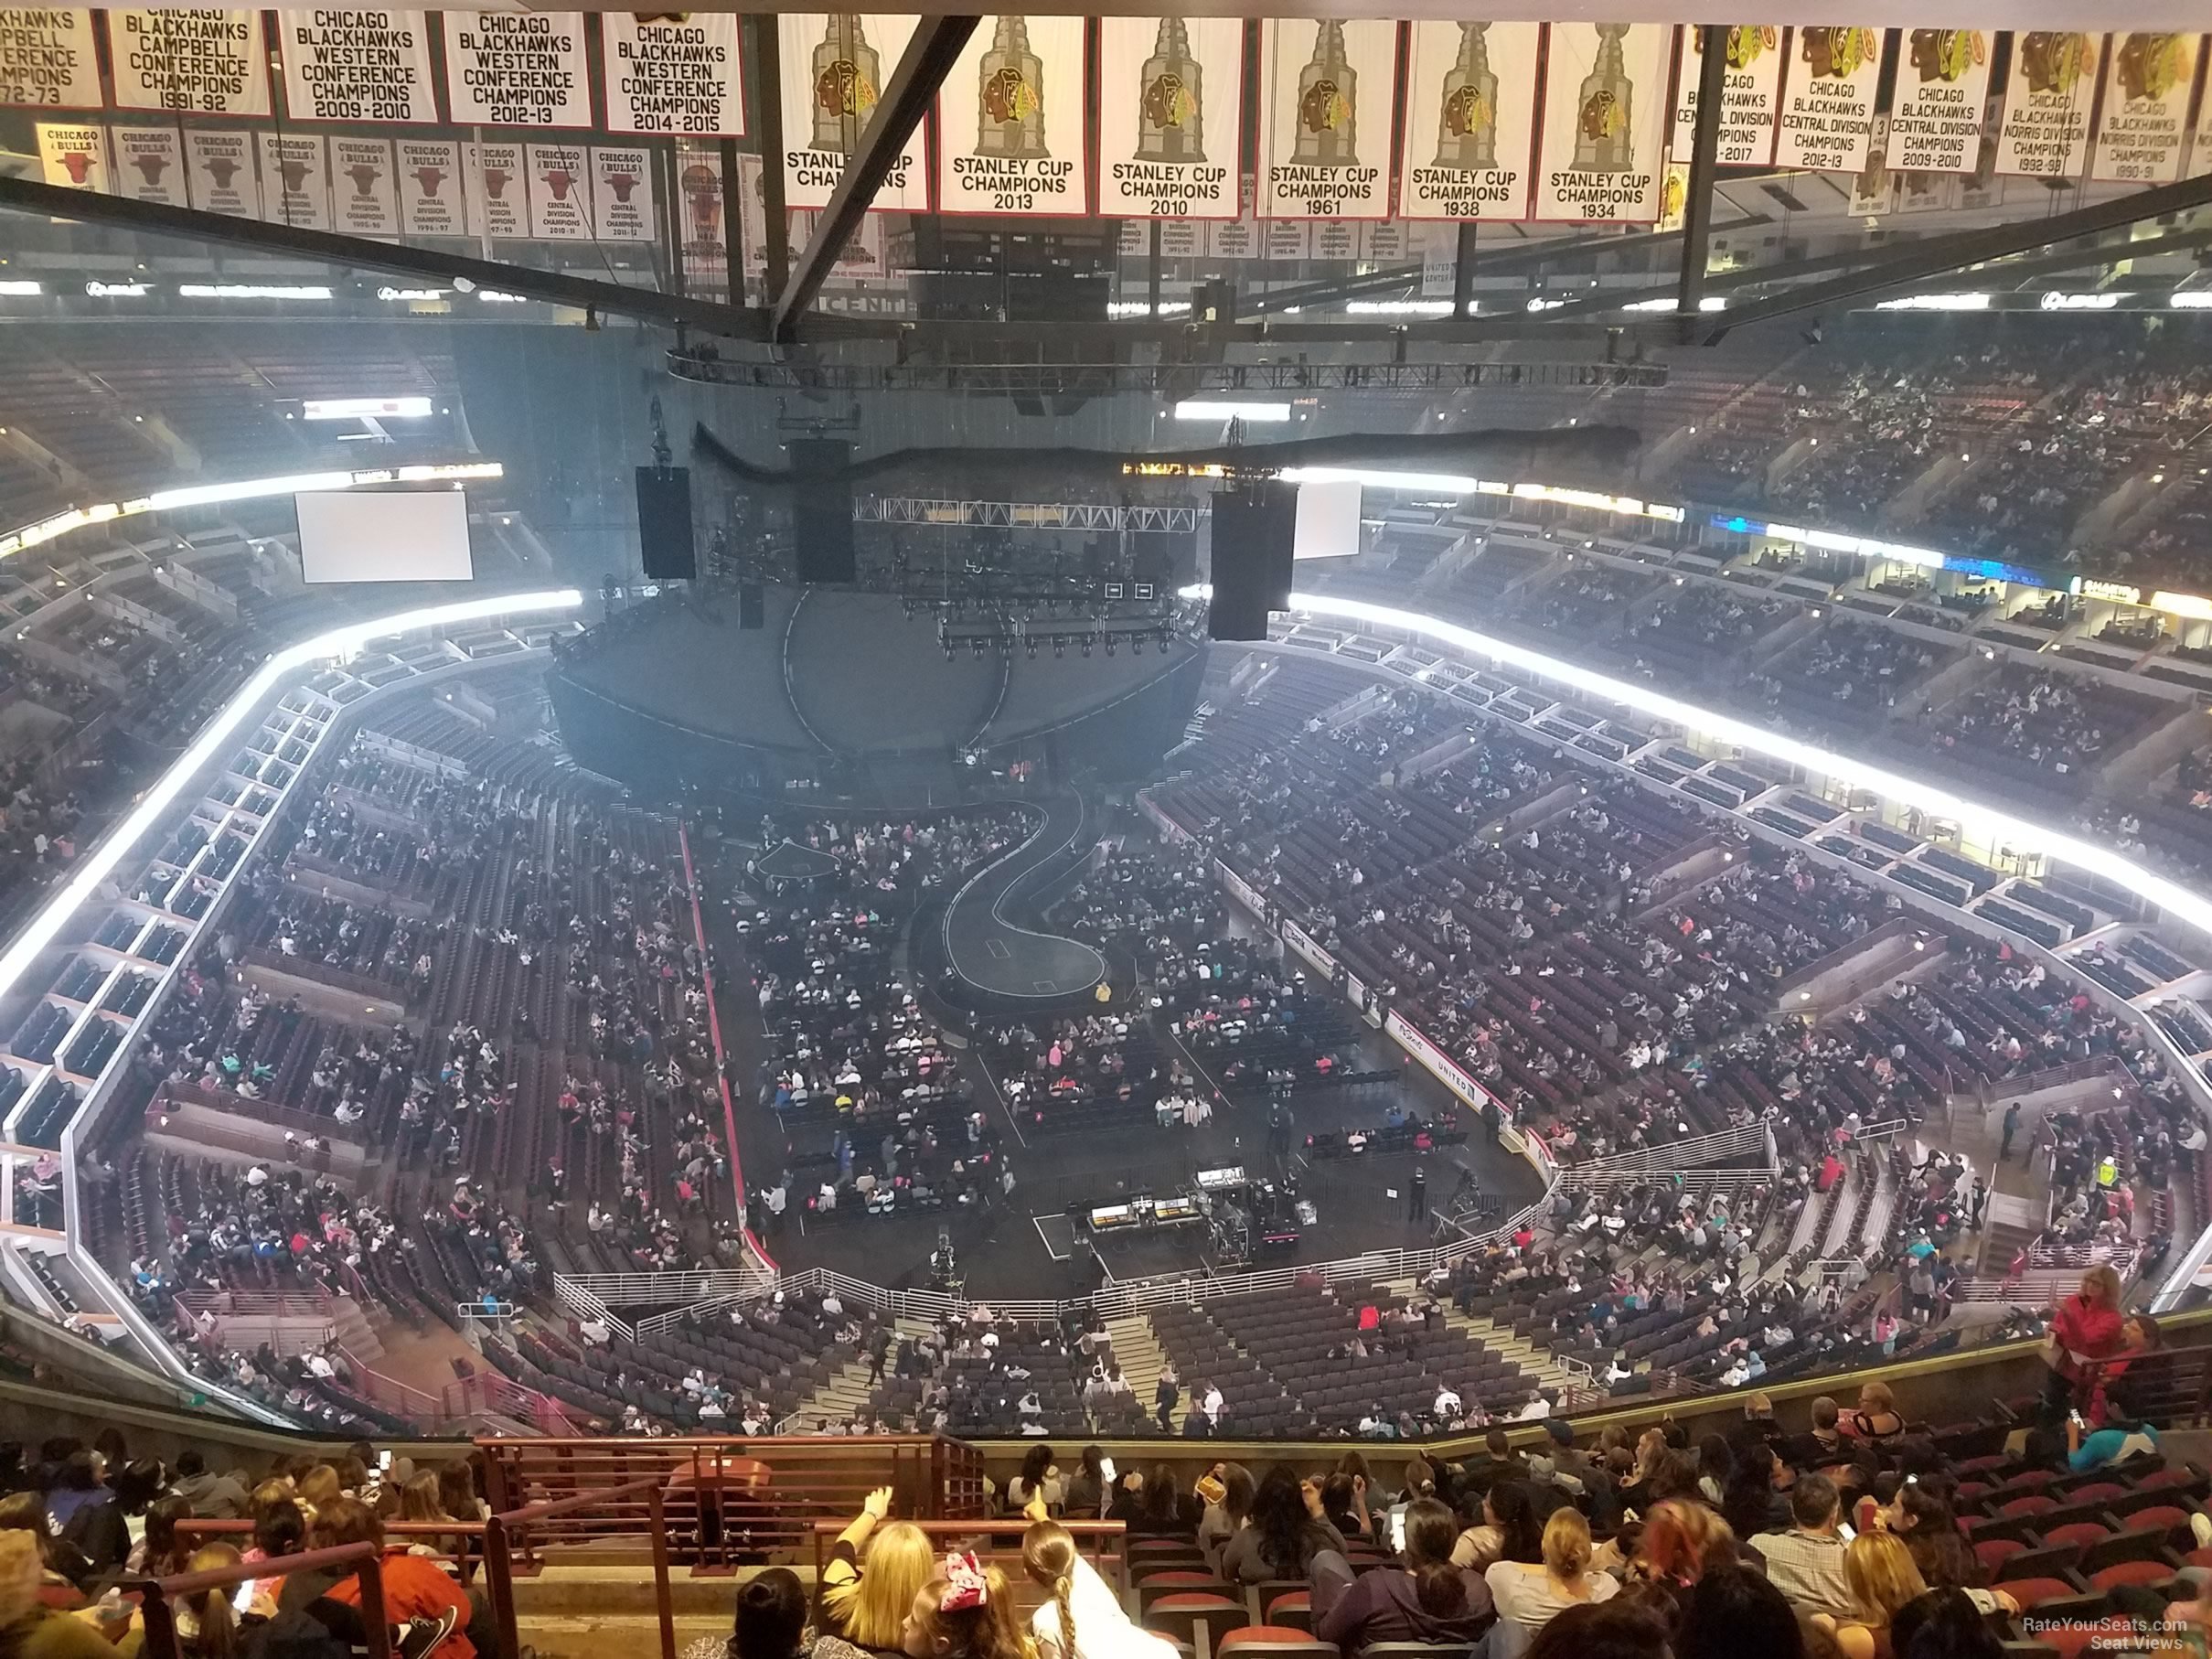 section 310, row 17 seat view  for concert - united center